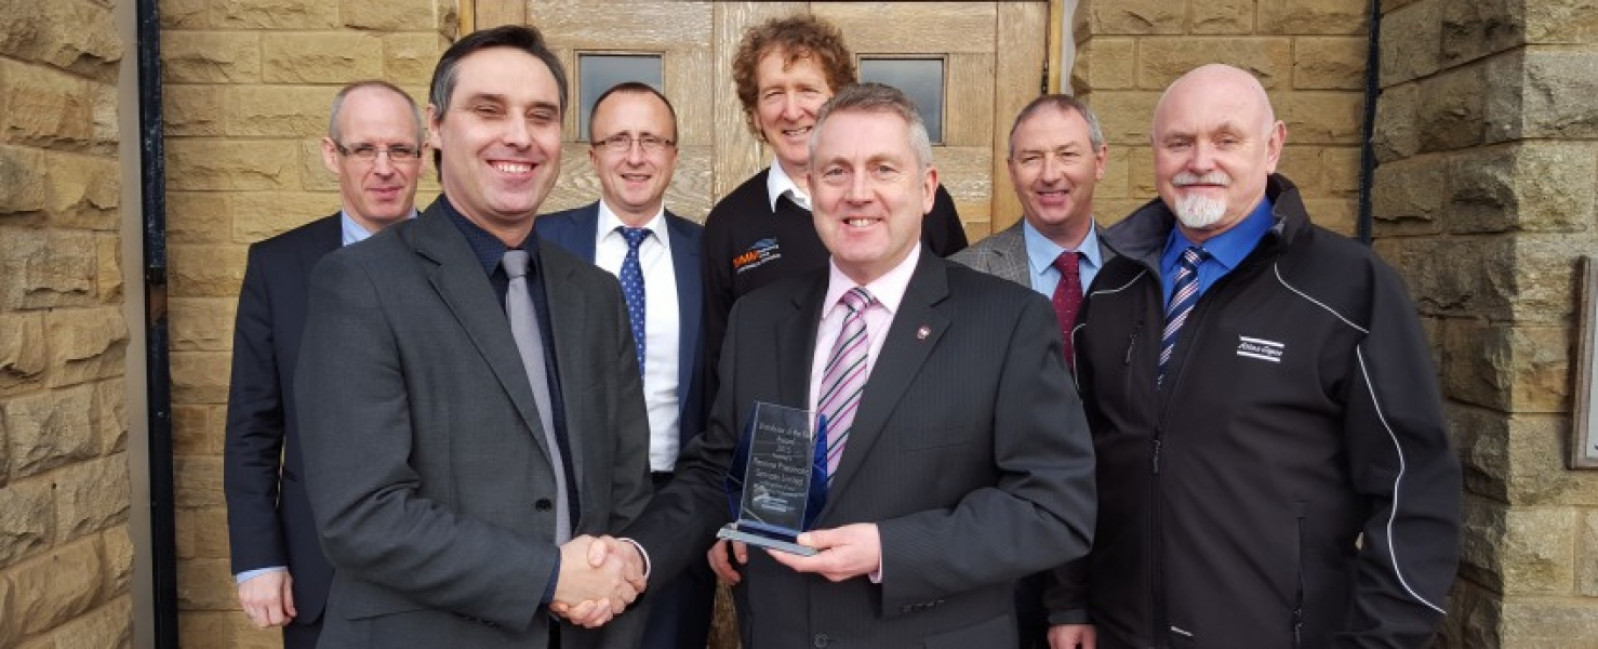 PPS wins Atlas Copco Distributor of the Year 2015